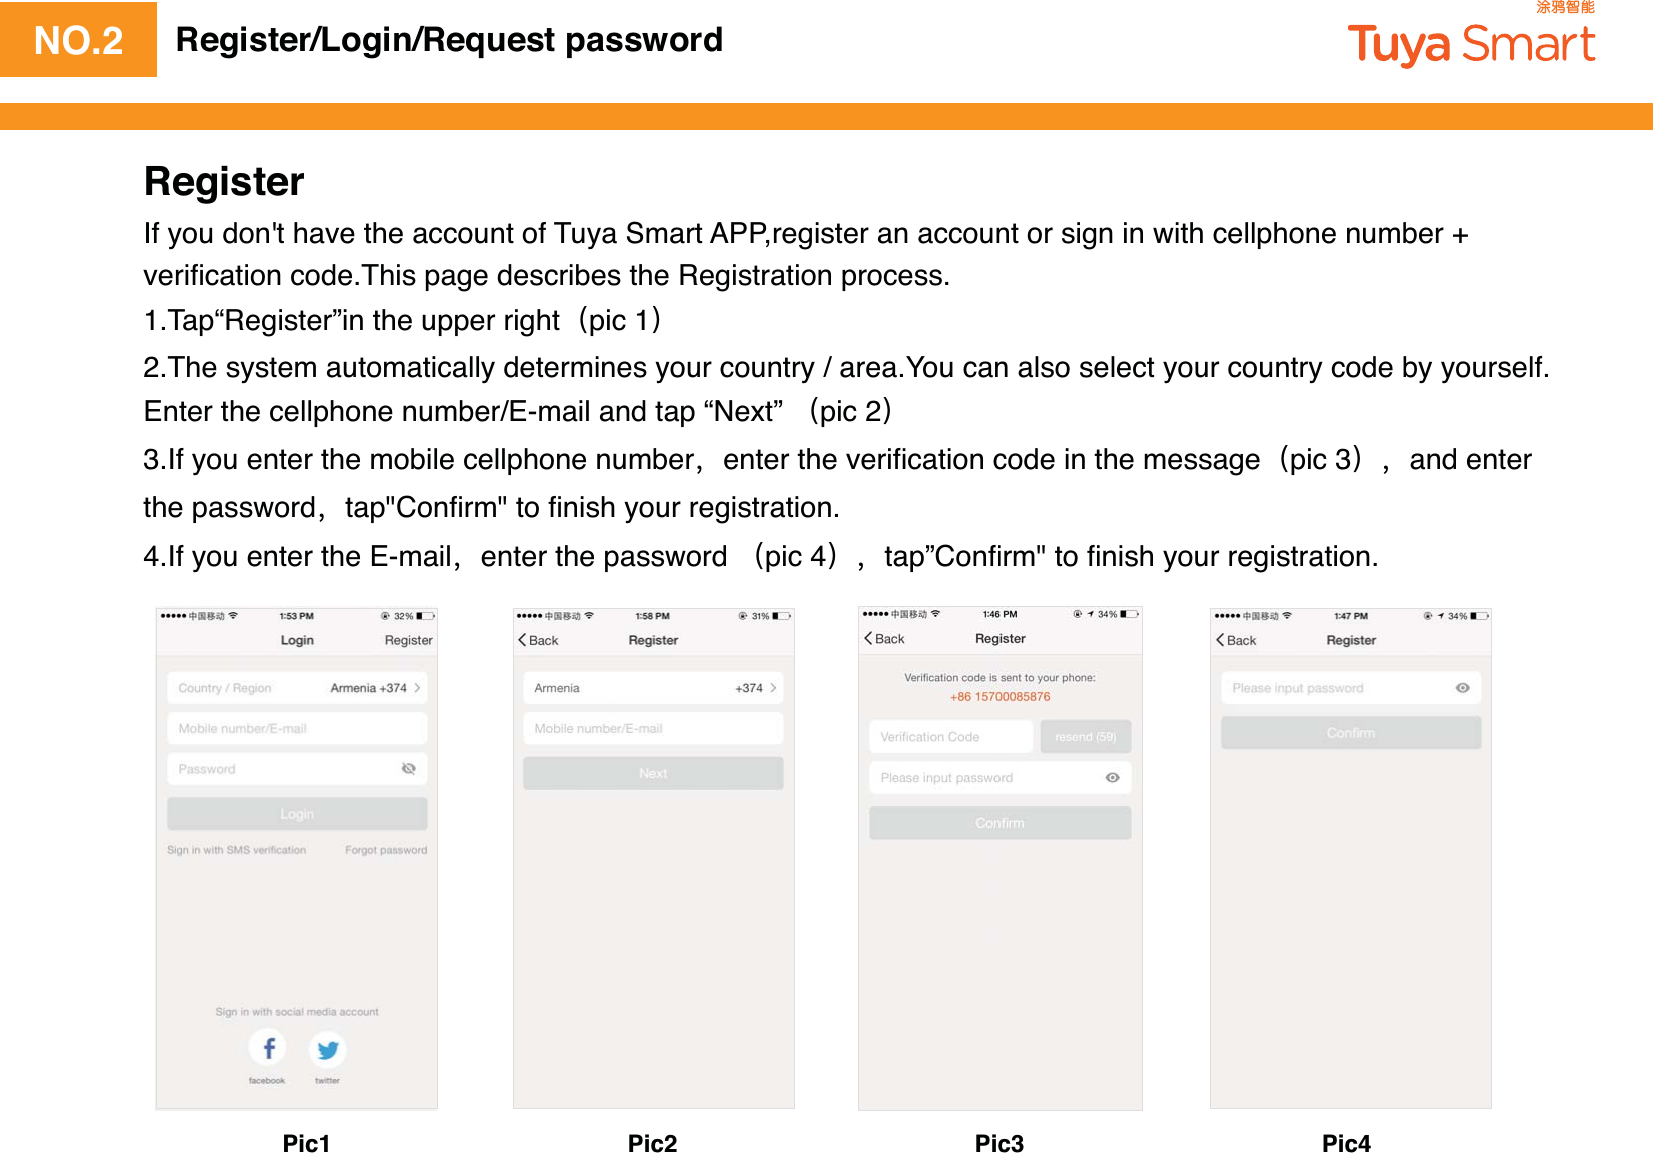 NO.2 Register/Login/Request passwordRegisterIf you don&apos;t have the account of Tuya Smart APP,register an account or sign in with cellphone number + veriﬁcation code.This page describes the Registration process.1.Tap“Register”in the upper rightpic 12.The system automatically determines your country / area.You can also select your country code by yourself.Enter the cellphone number/E-mail and tap “Next” pic 23.If you enter the mobile cellphone numberenter the veriﬁcation code in the messagepic 3and enter the passwordtap&quot;Conﬁrm&quot; to ﬁnish your registration.4.If you enter the E-mailenter the password pic 4tap”Conﬁrm&quot; to ﬁnish your registration.Pic1 Pic2 Pic3 Pic4